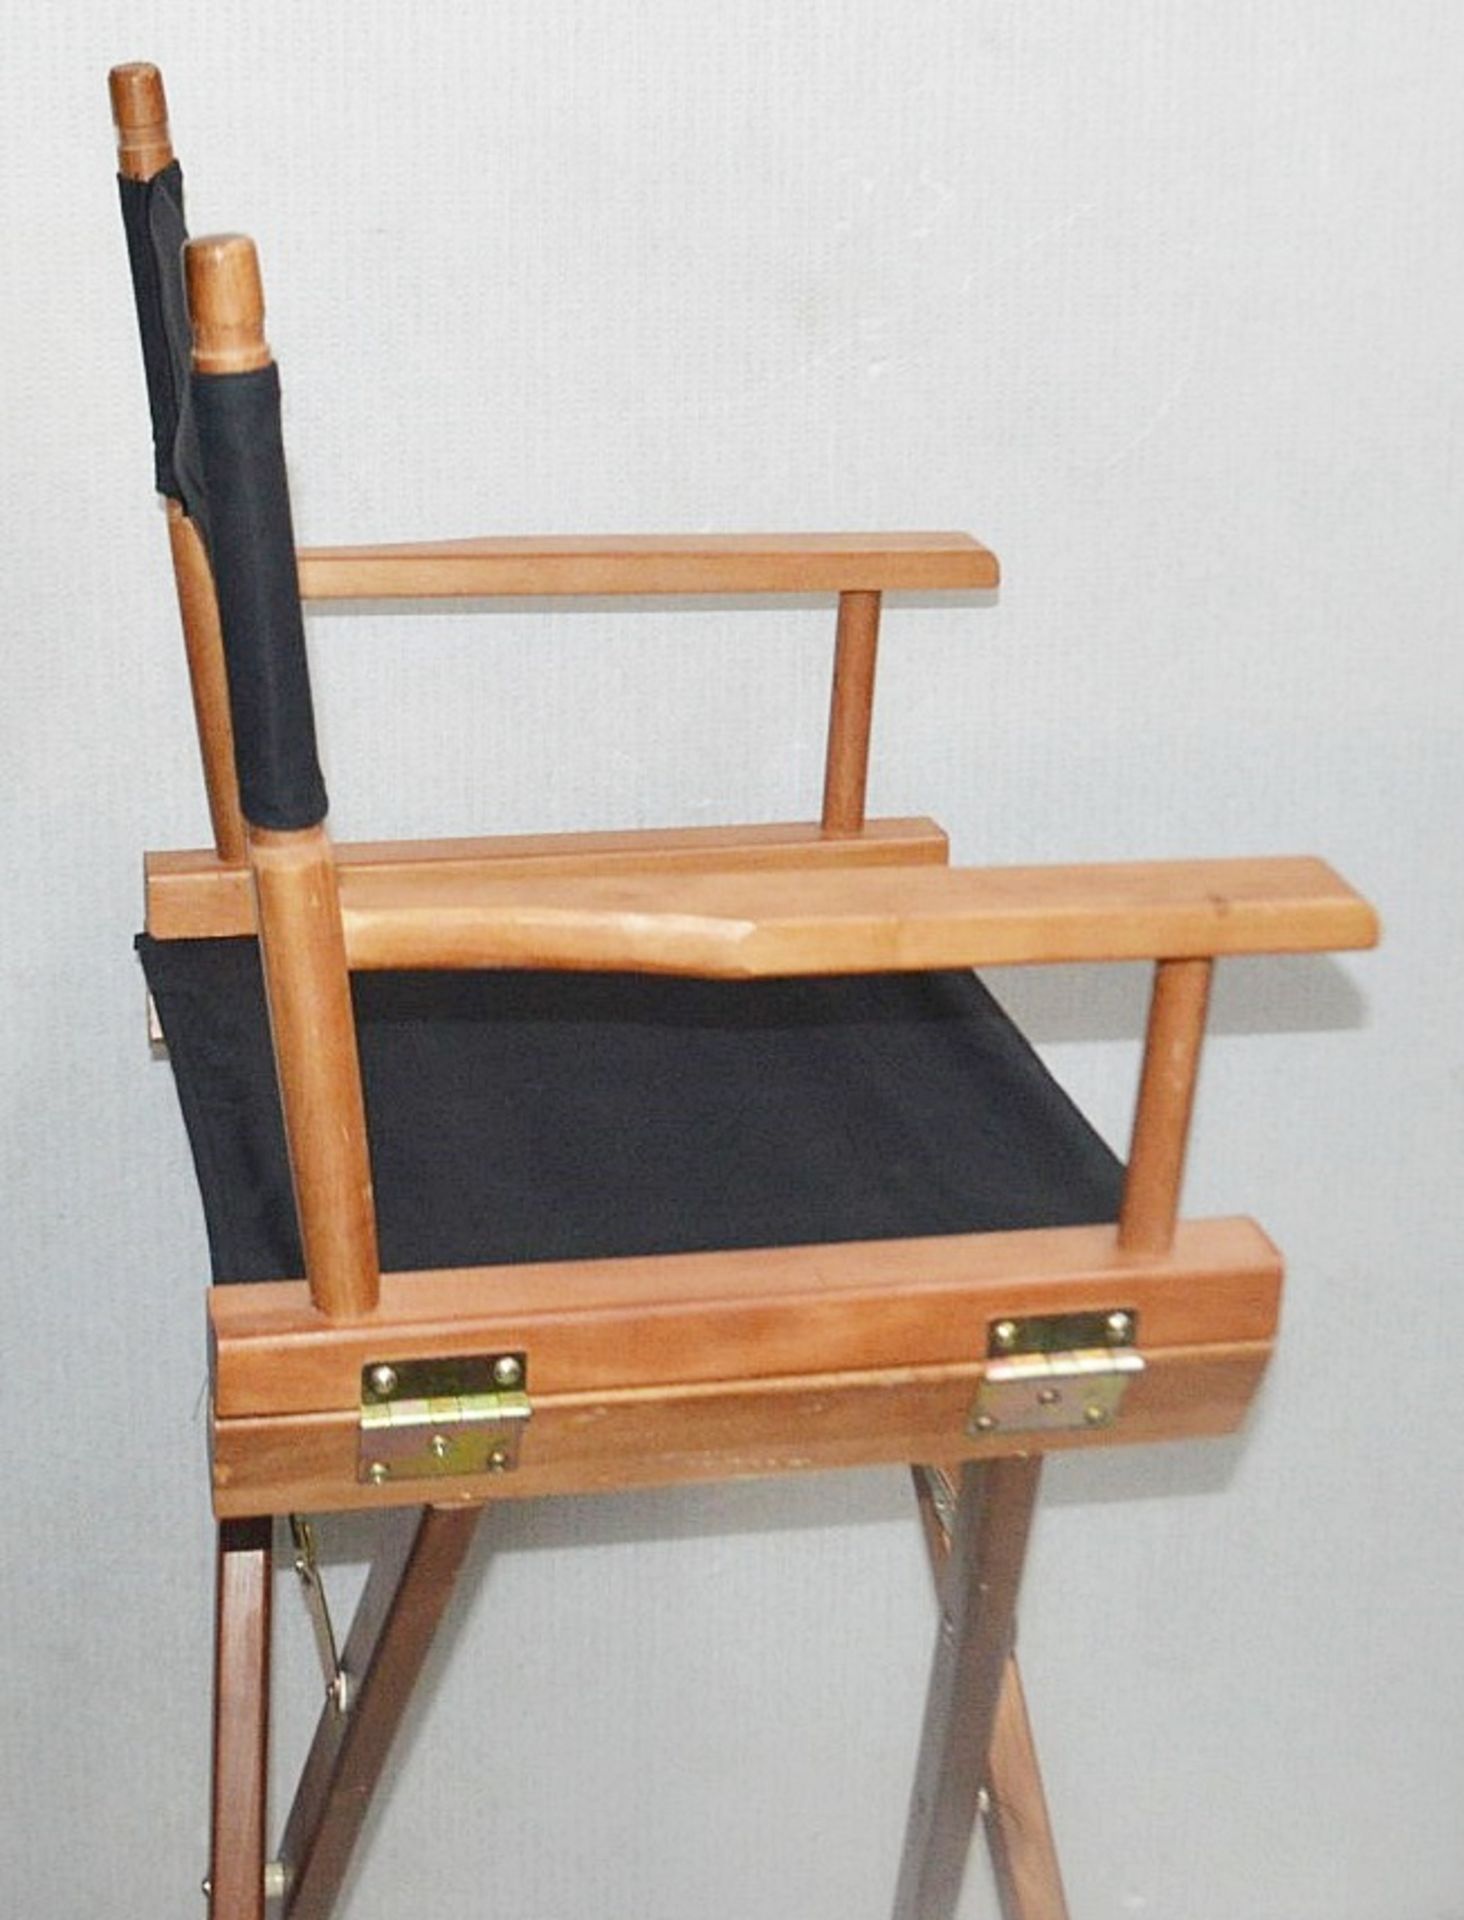 1 x Professional Tall Folding Directors Chair - Ex-Display Prop - Dimensions (Approx): H120 x W52 - Image 4 of 4